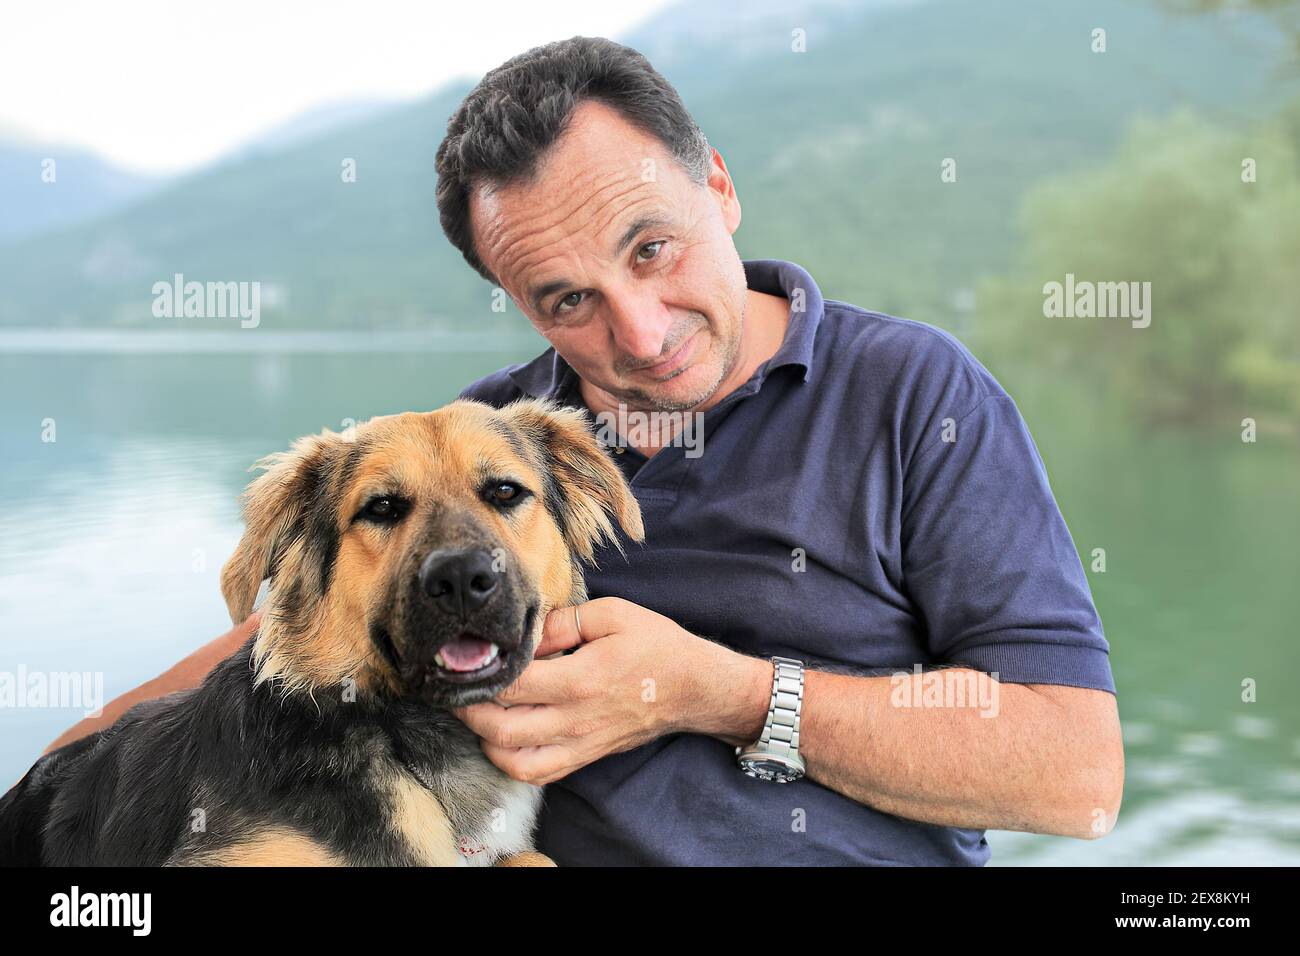 Portrait of a man together with his adopted dog Stock Photo